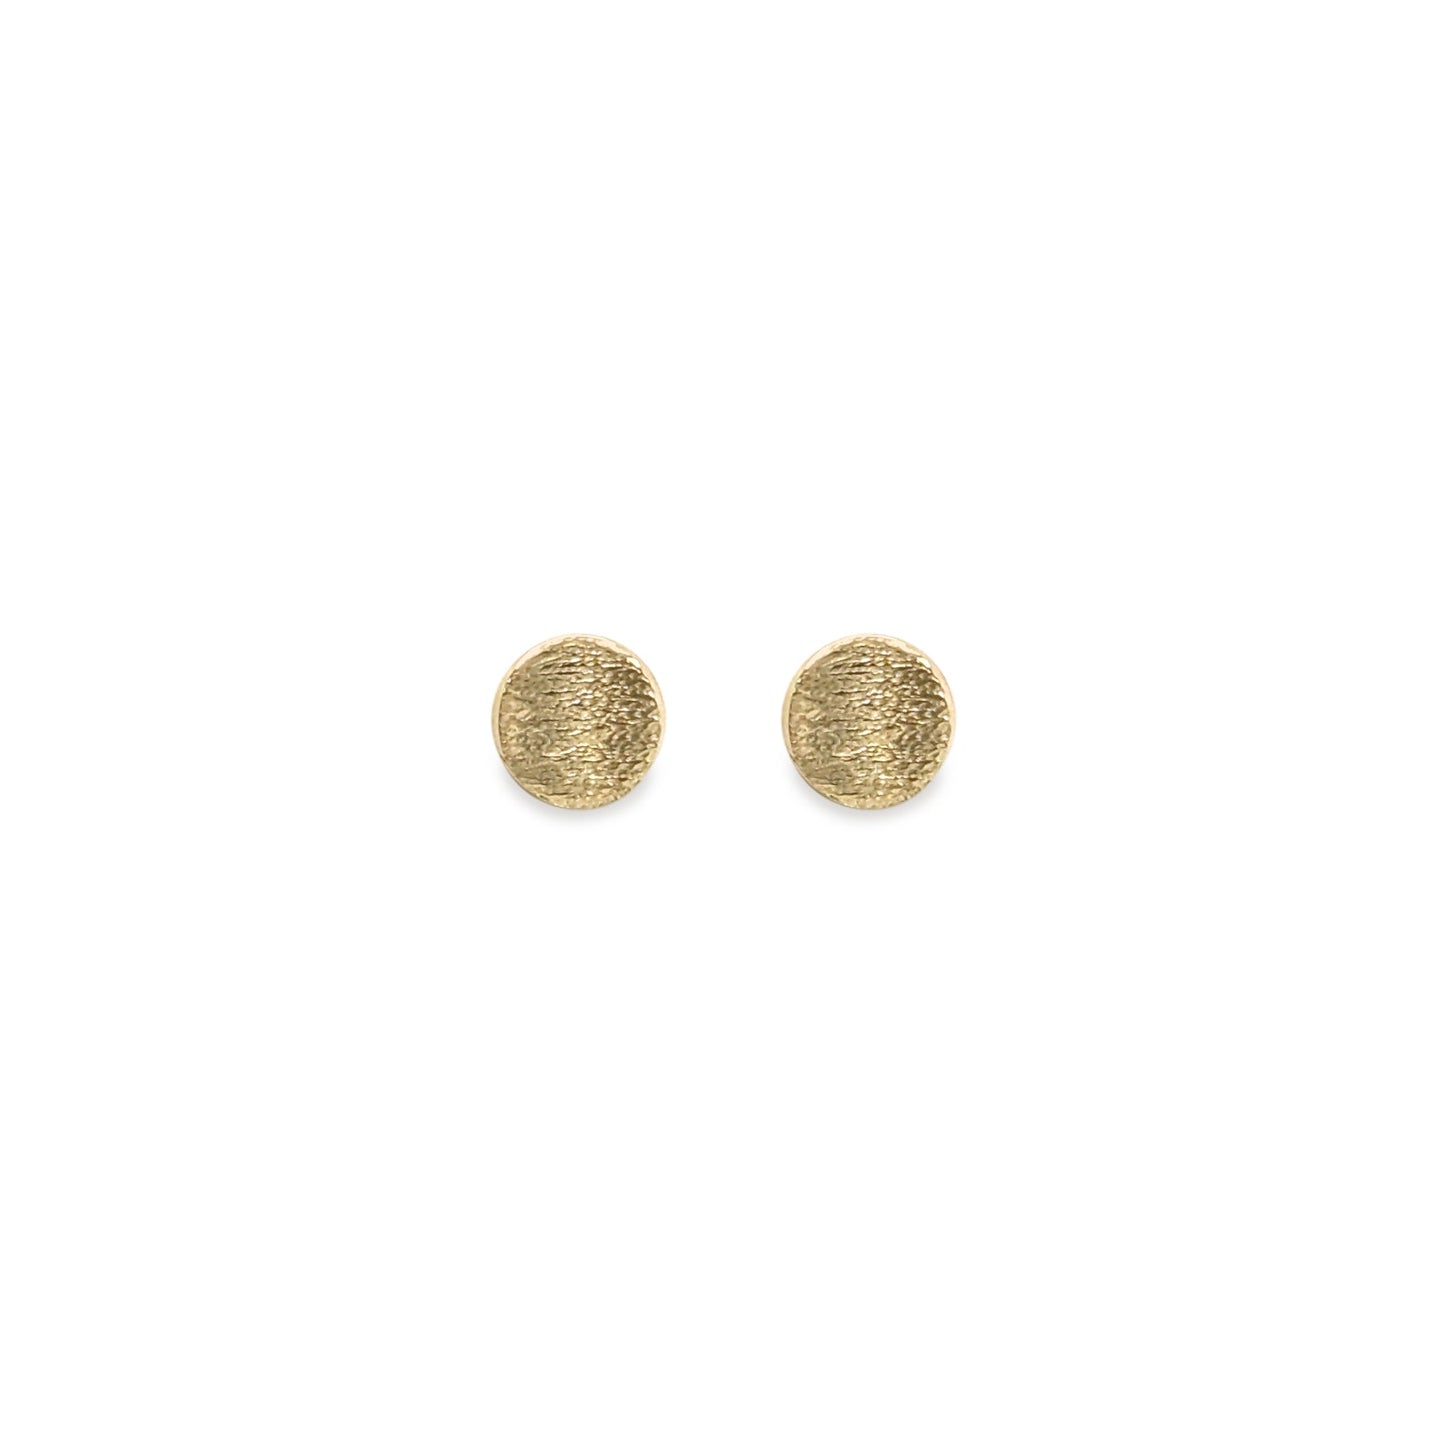 Round gold curved stud earrings